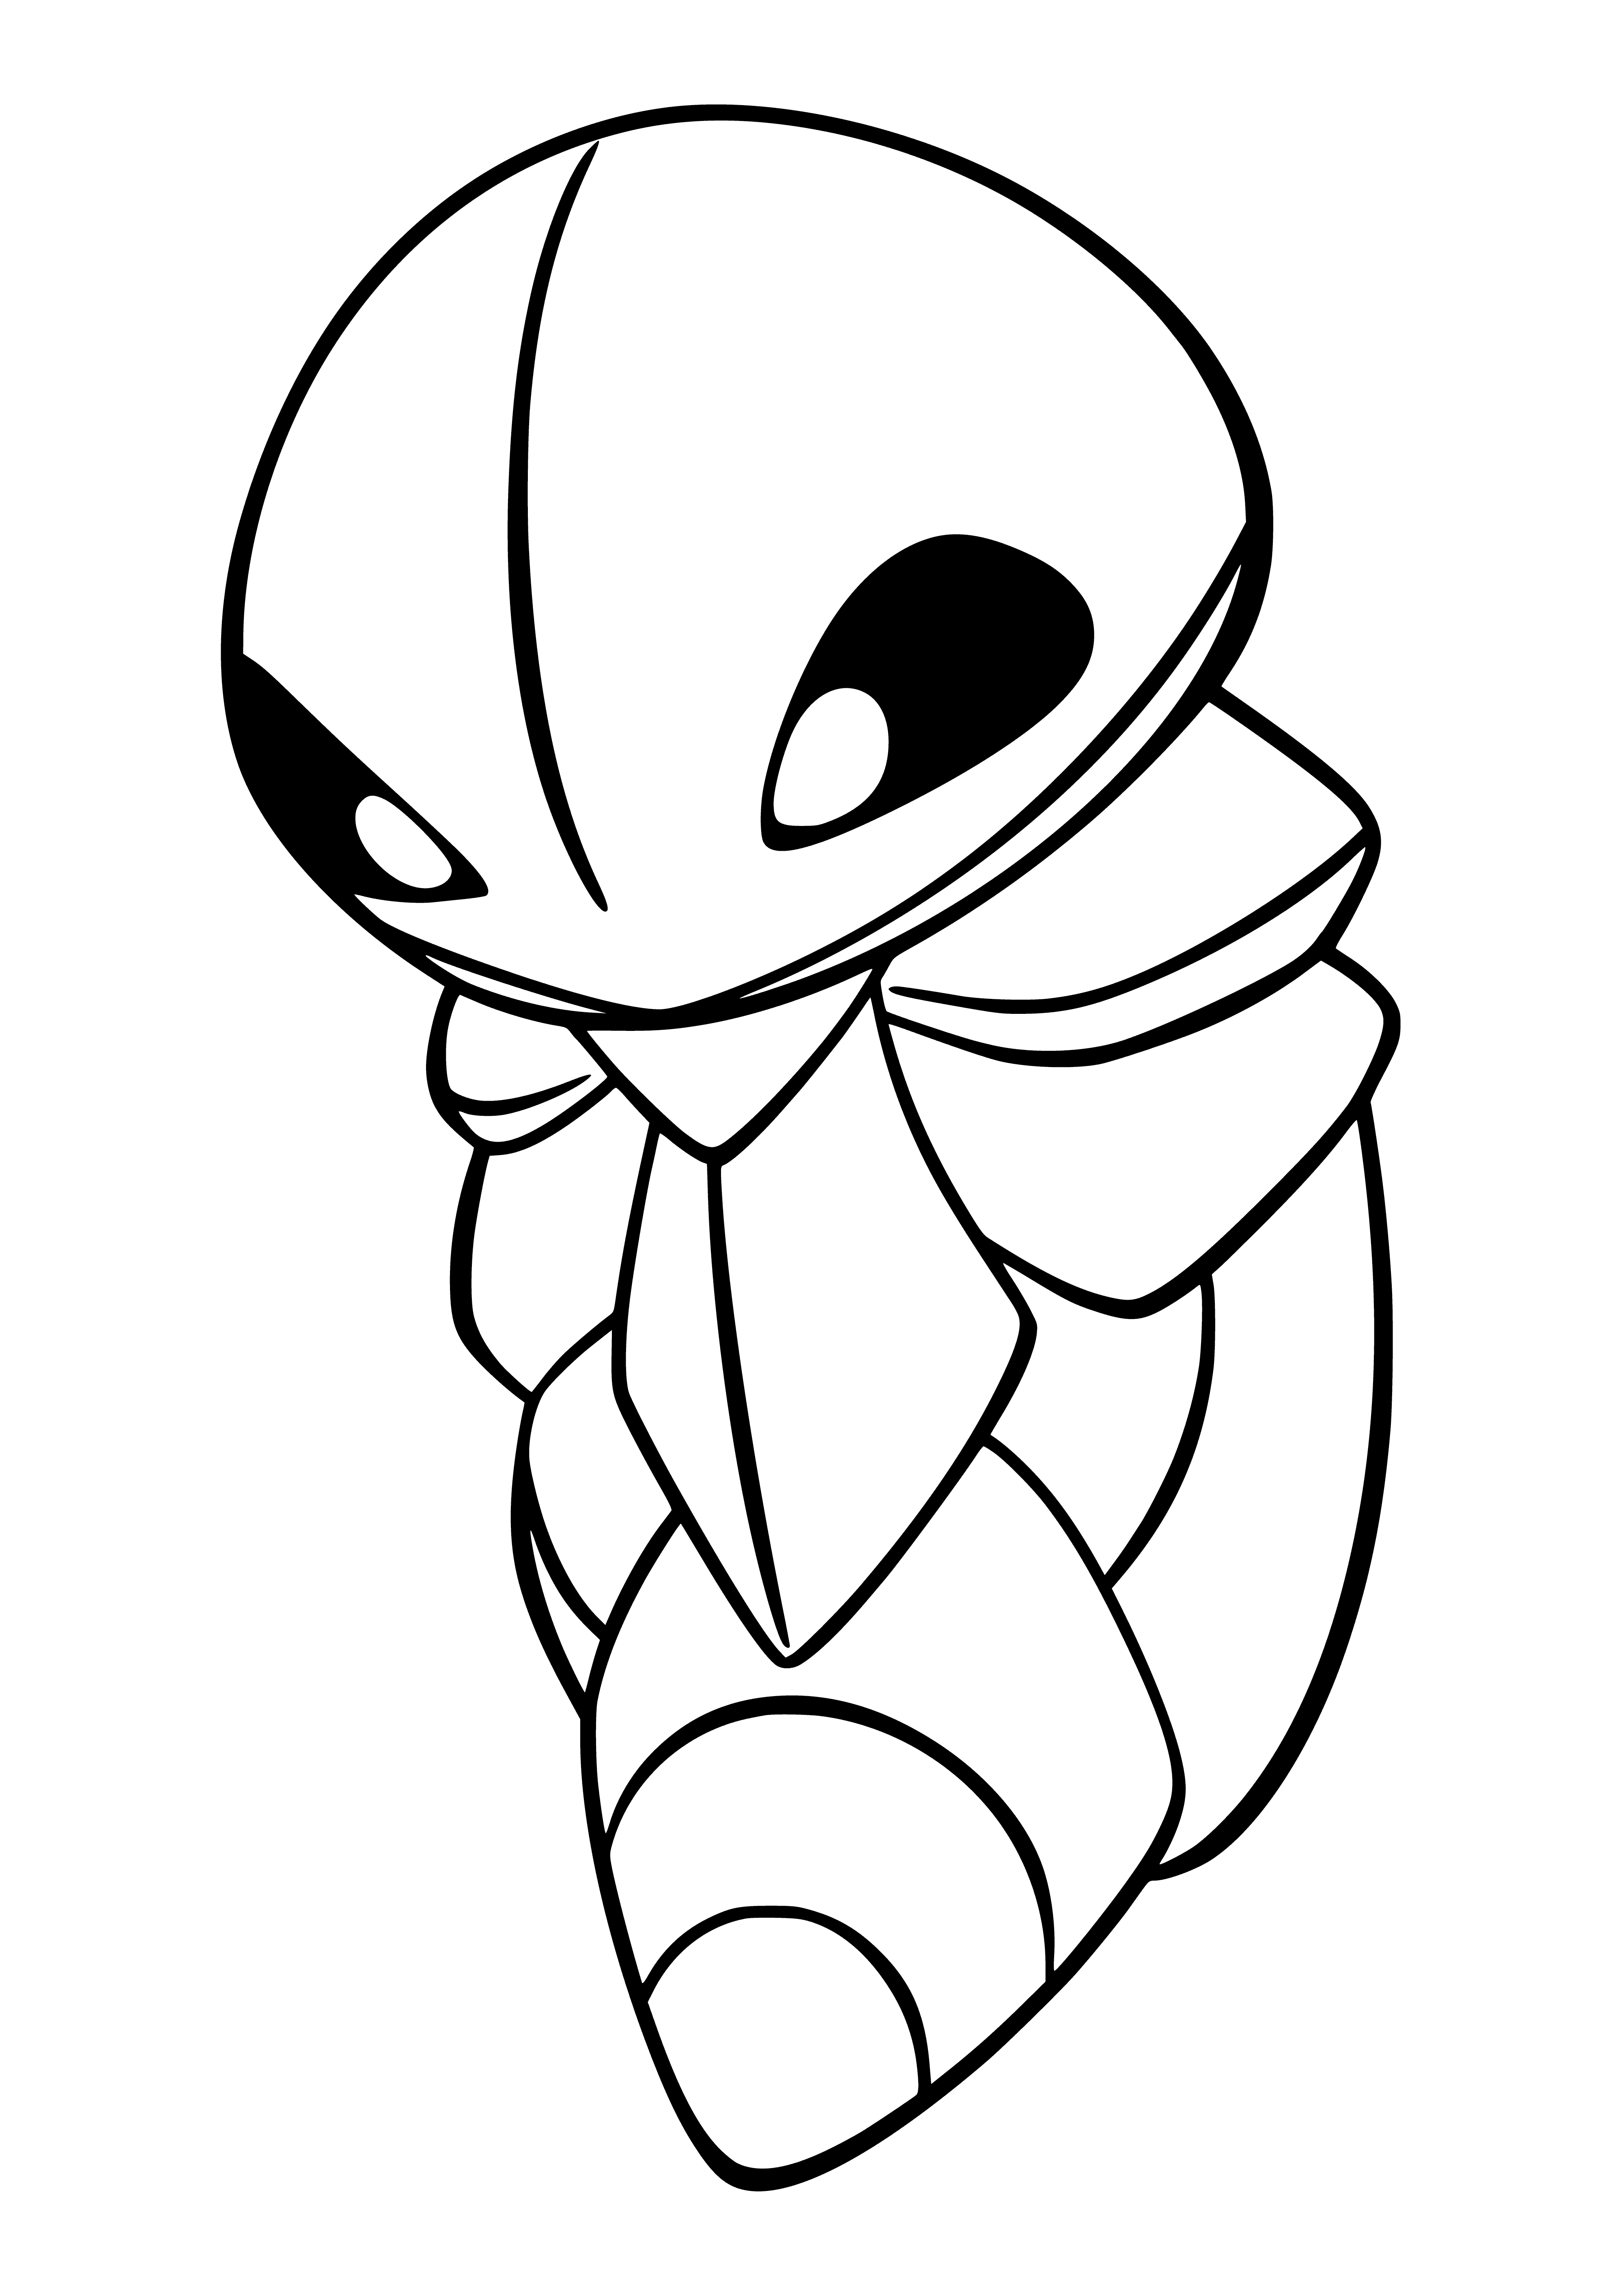 coloring page: Kakuna is a small, oval-shaped Pokemon with two eyes, feelers, hard brown segments and two small legs.